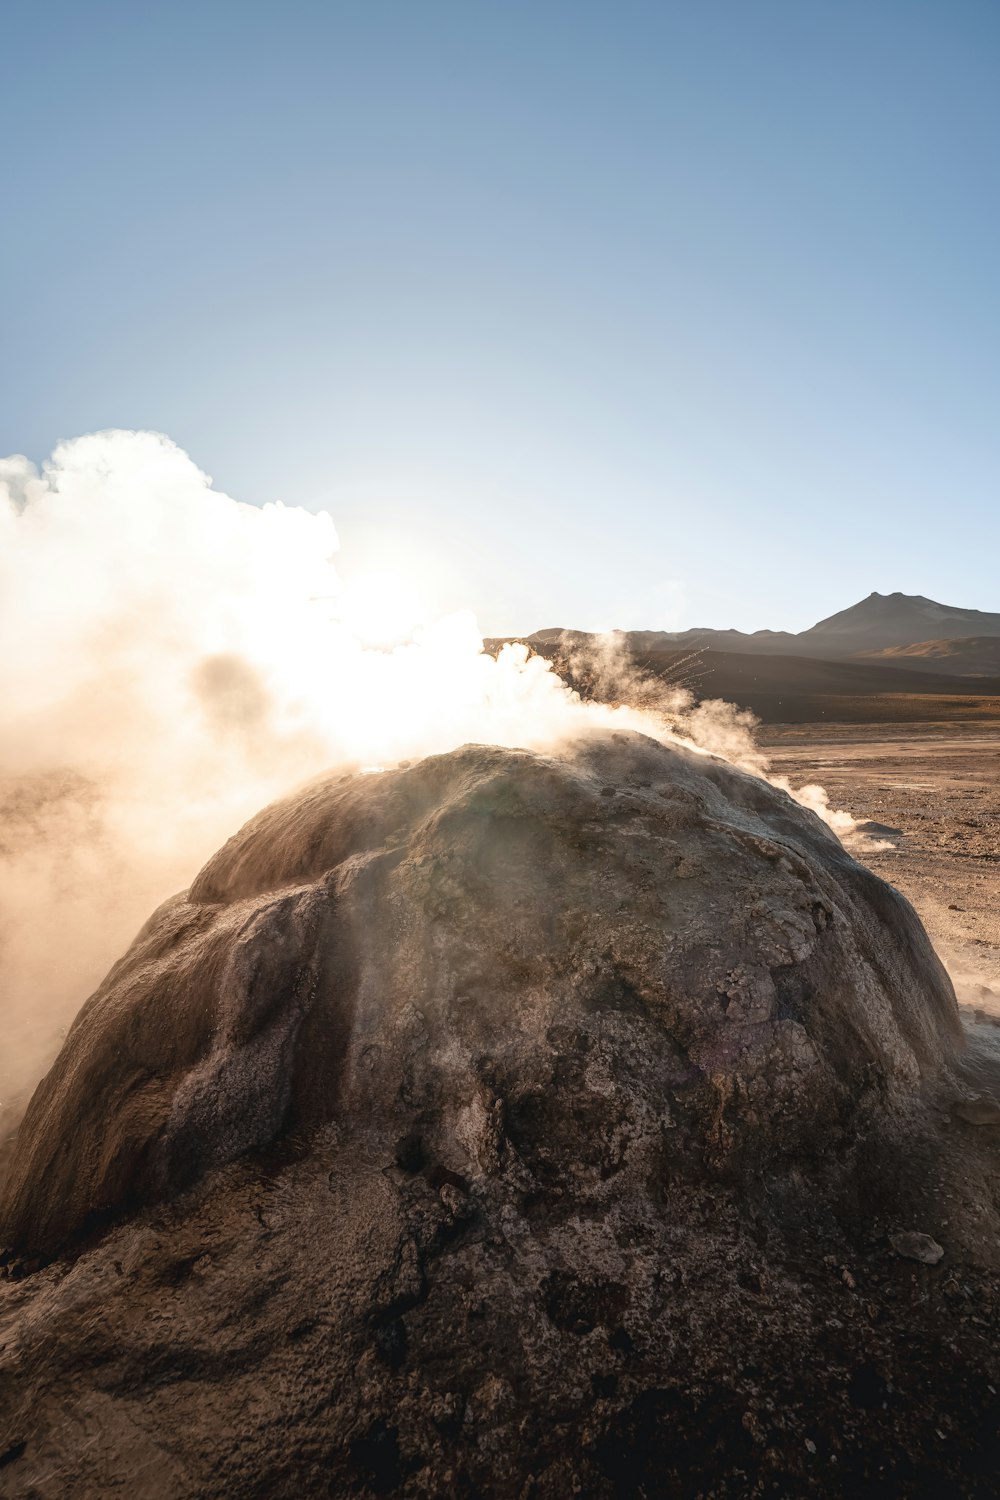 a large rock with steam coming out of it